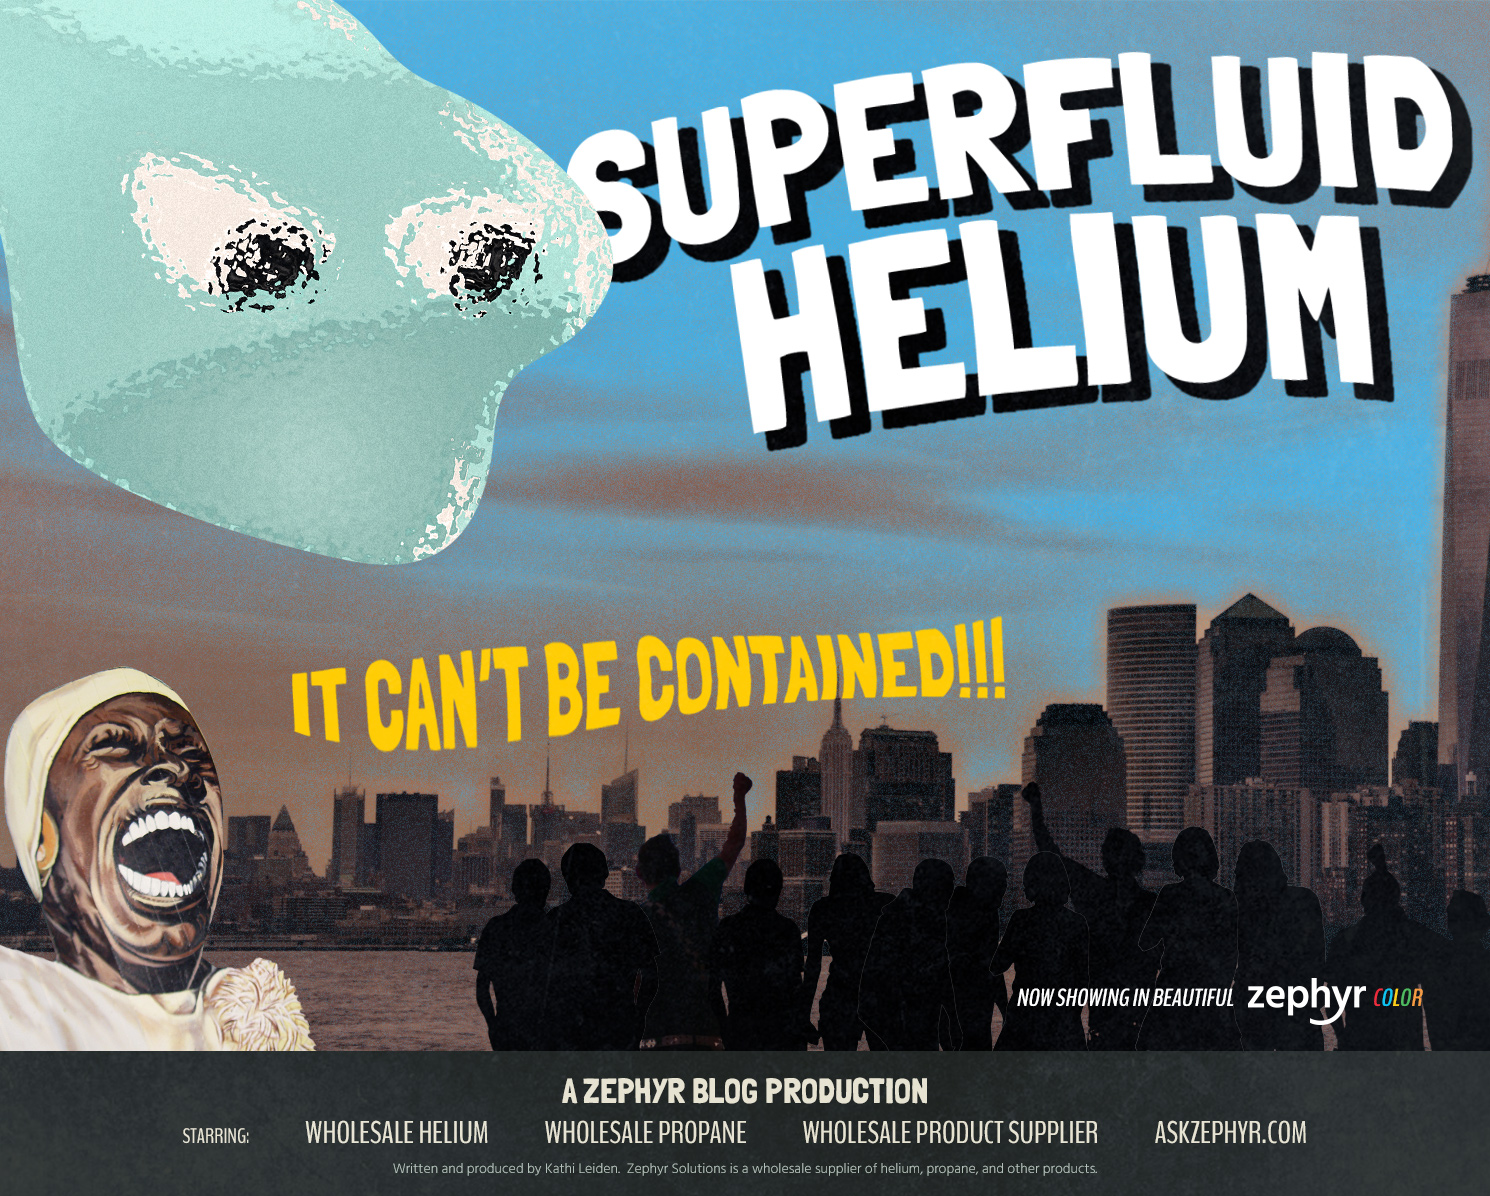 Superfluid helium acts unlike anything else on earth - Zephyr Solutions